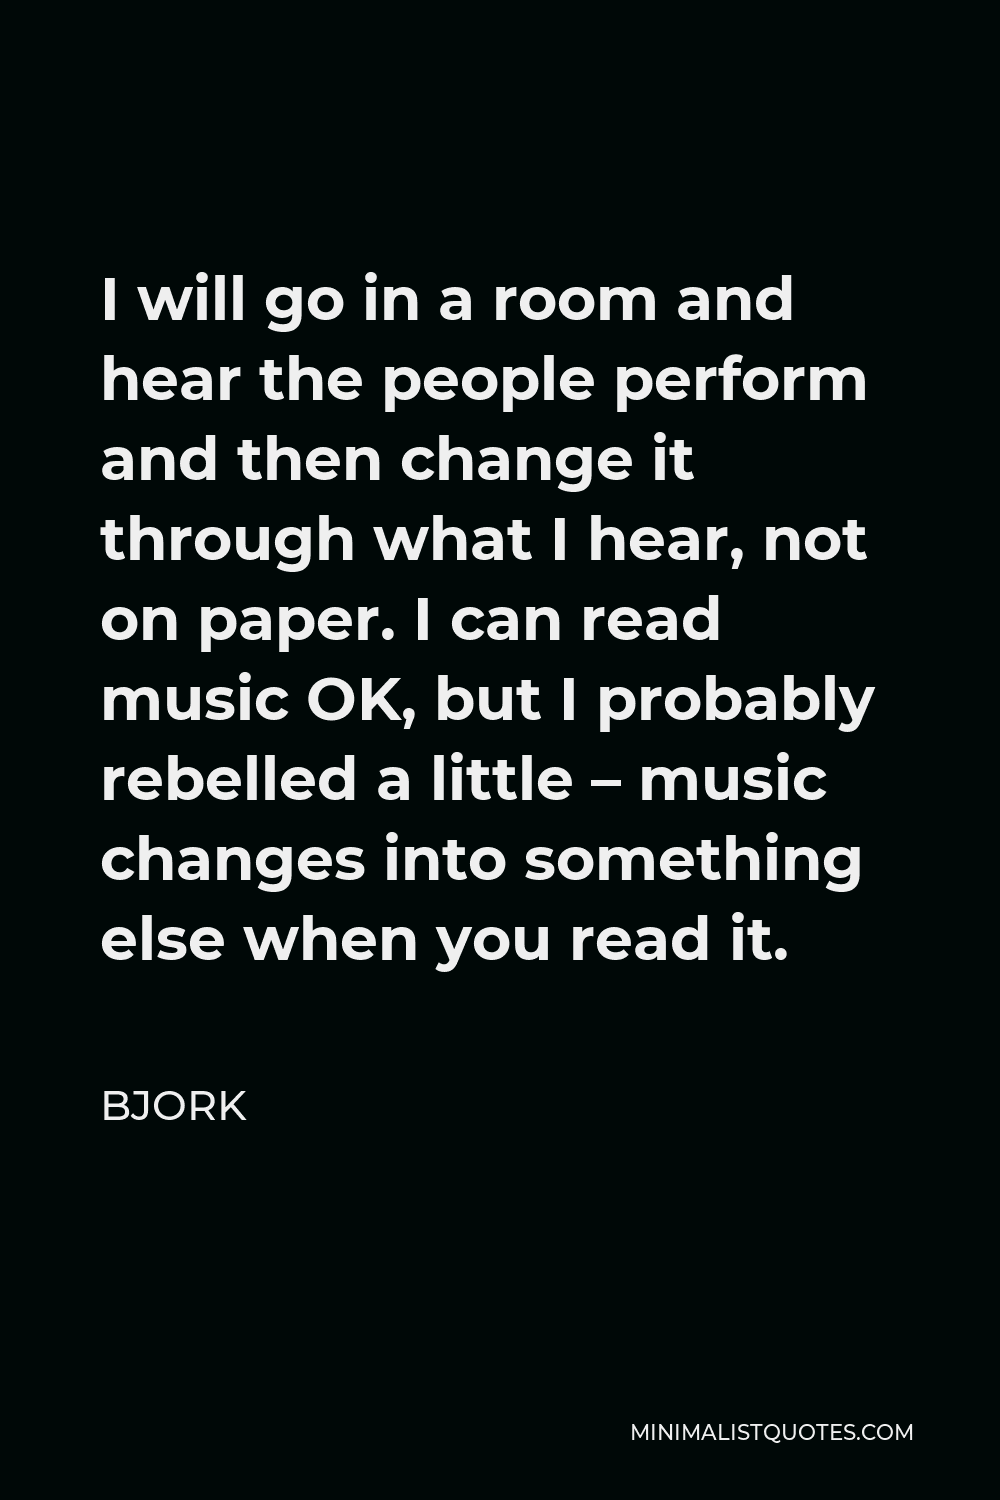 Bjork Quote - I will go in a room and hear the people perform and then change it through what I hear, not on paper. I can read music OK, but I probably rebelled a little – music changes into something else when you read it.